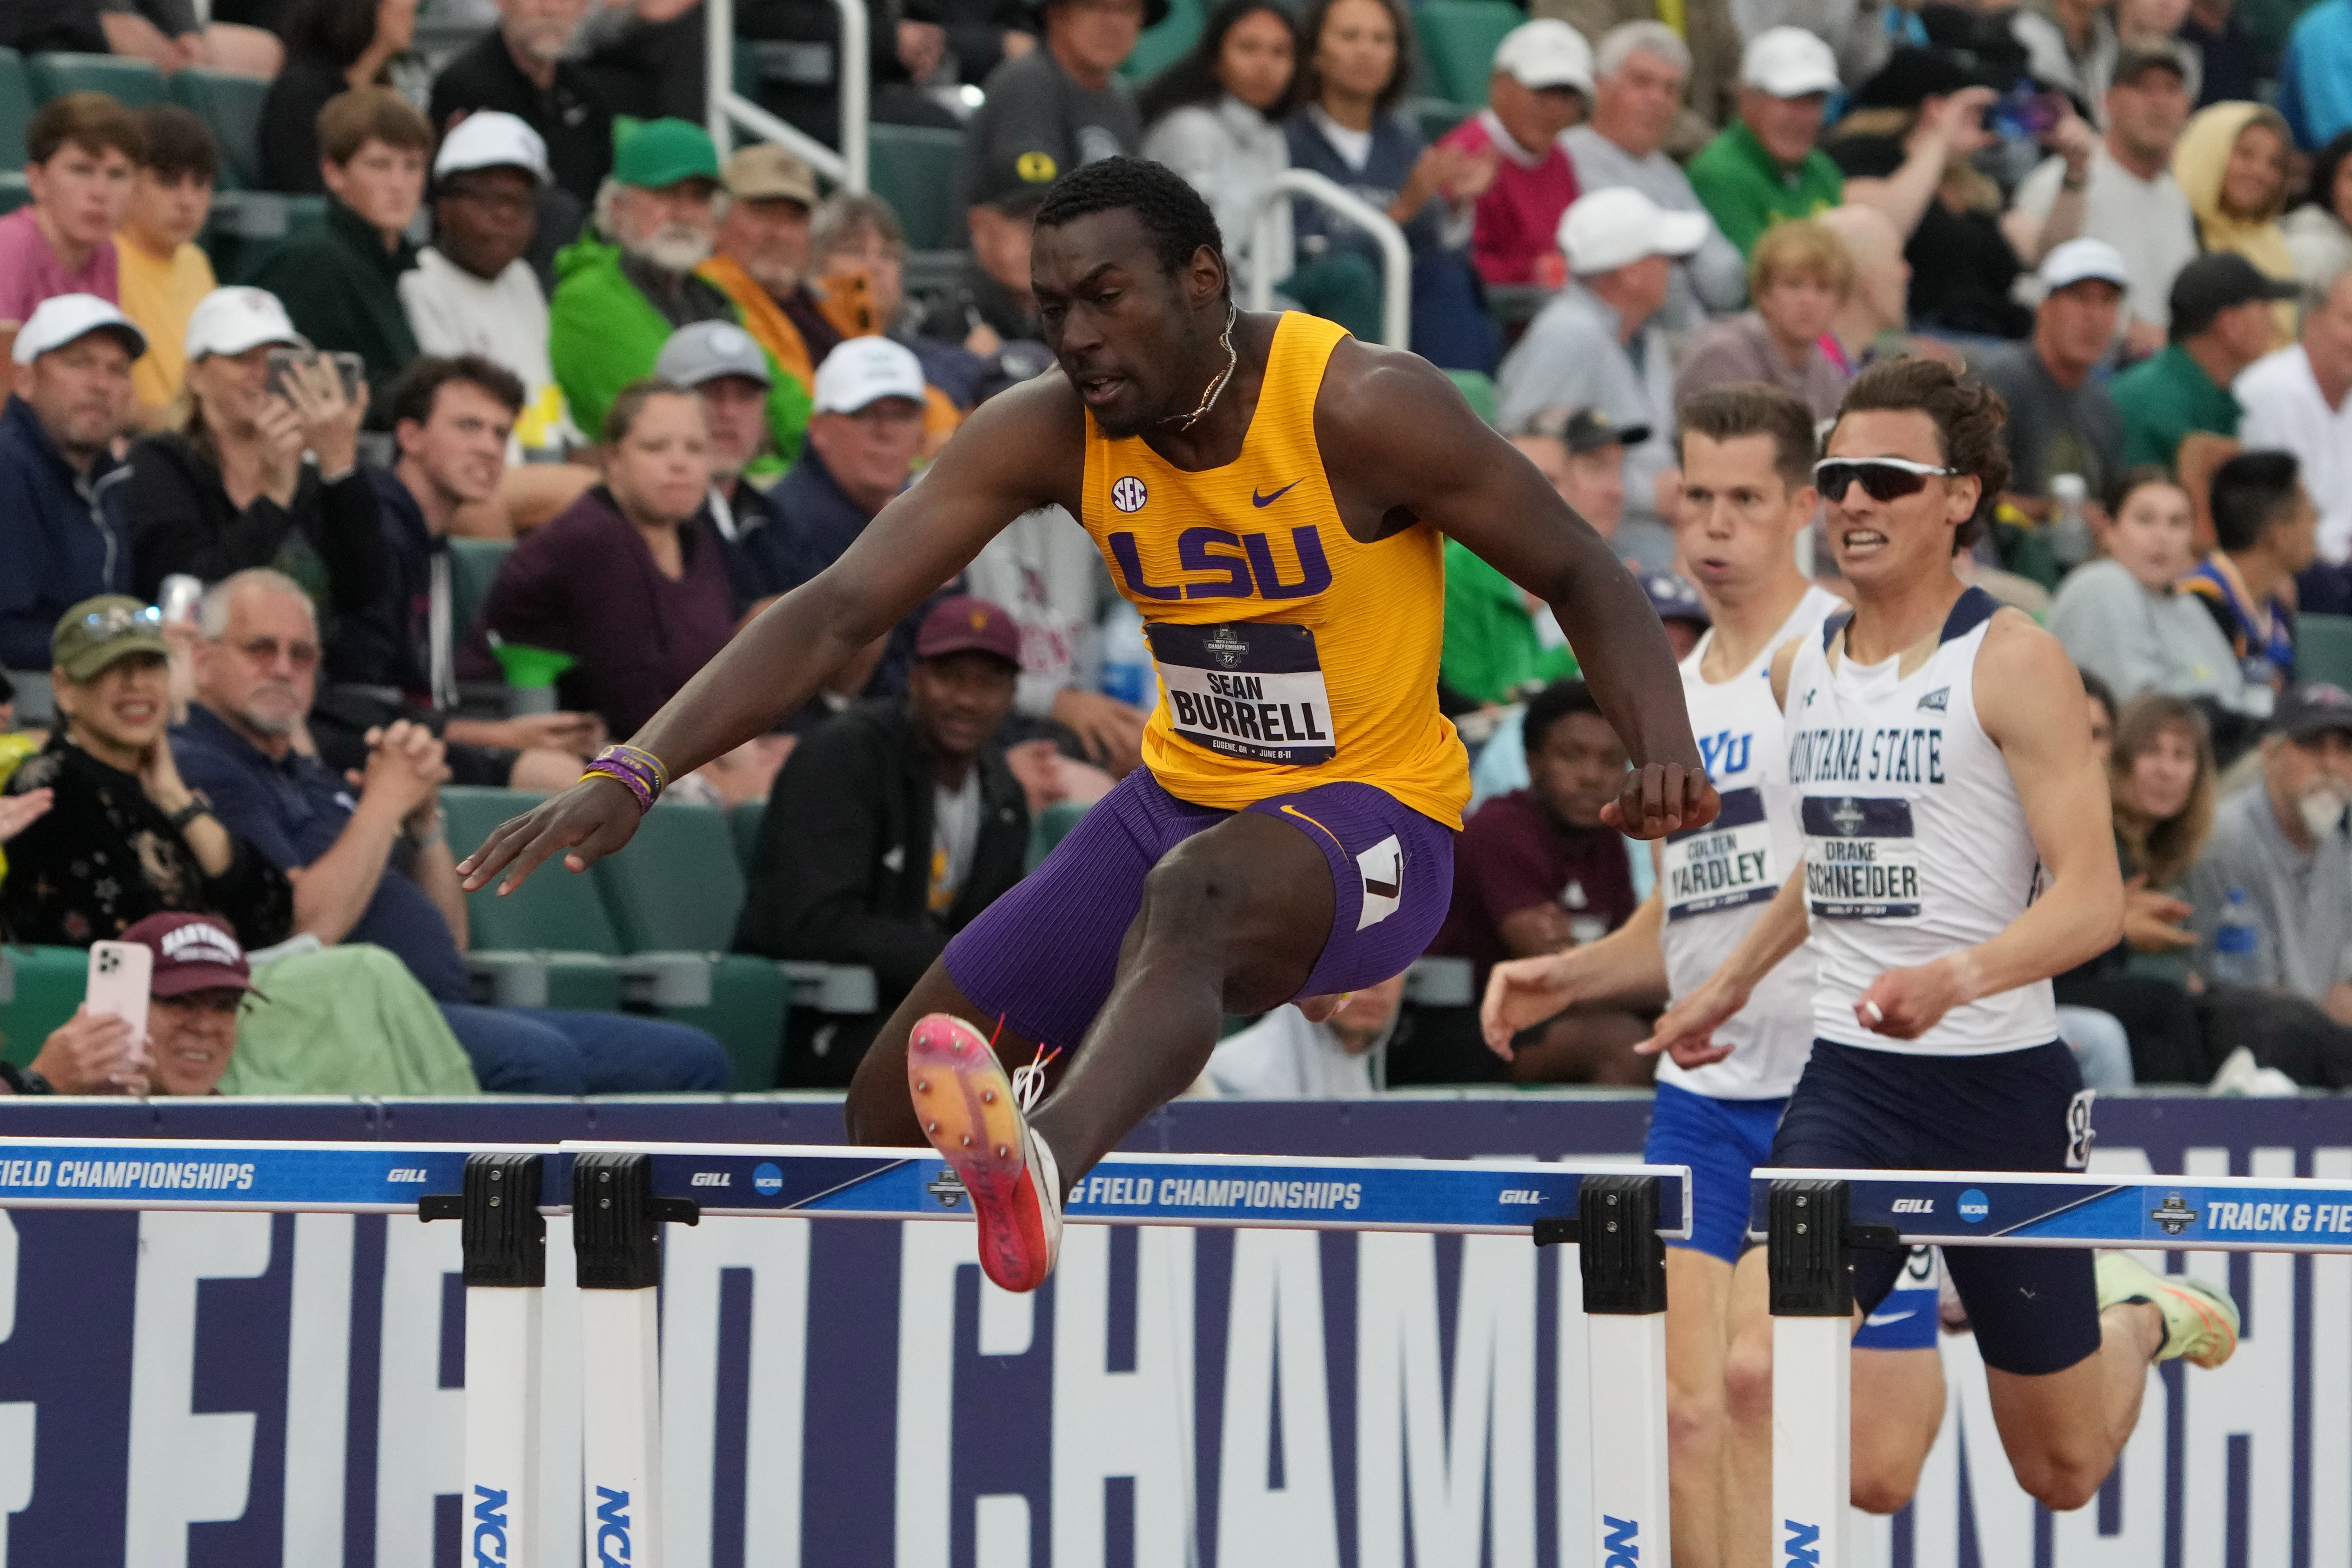 LSU track’s Bellamy and Burrell qualify for the finals on Day 1 of the Texas Relays